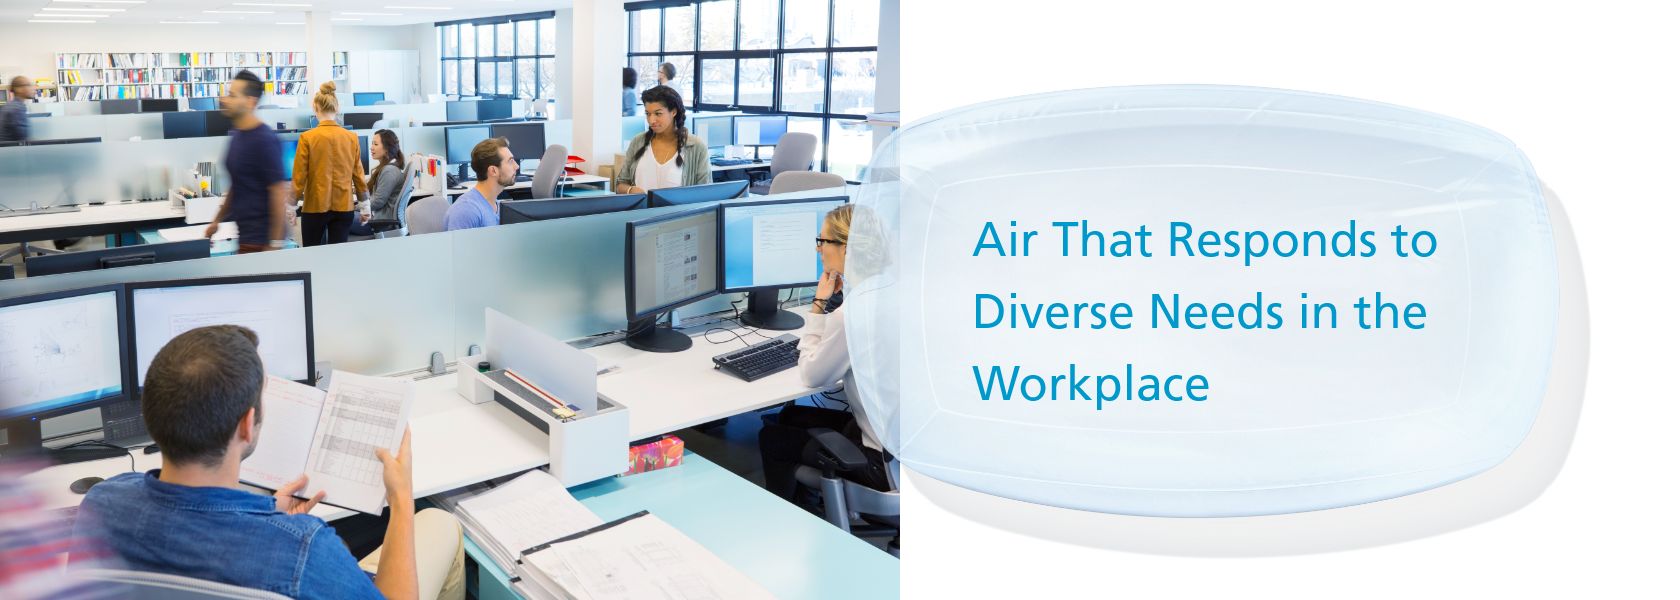 Air That Responds to Diverse Needs in the Workplace